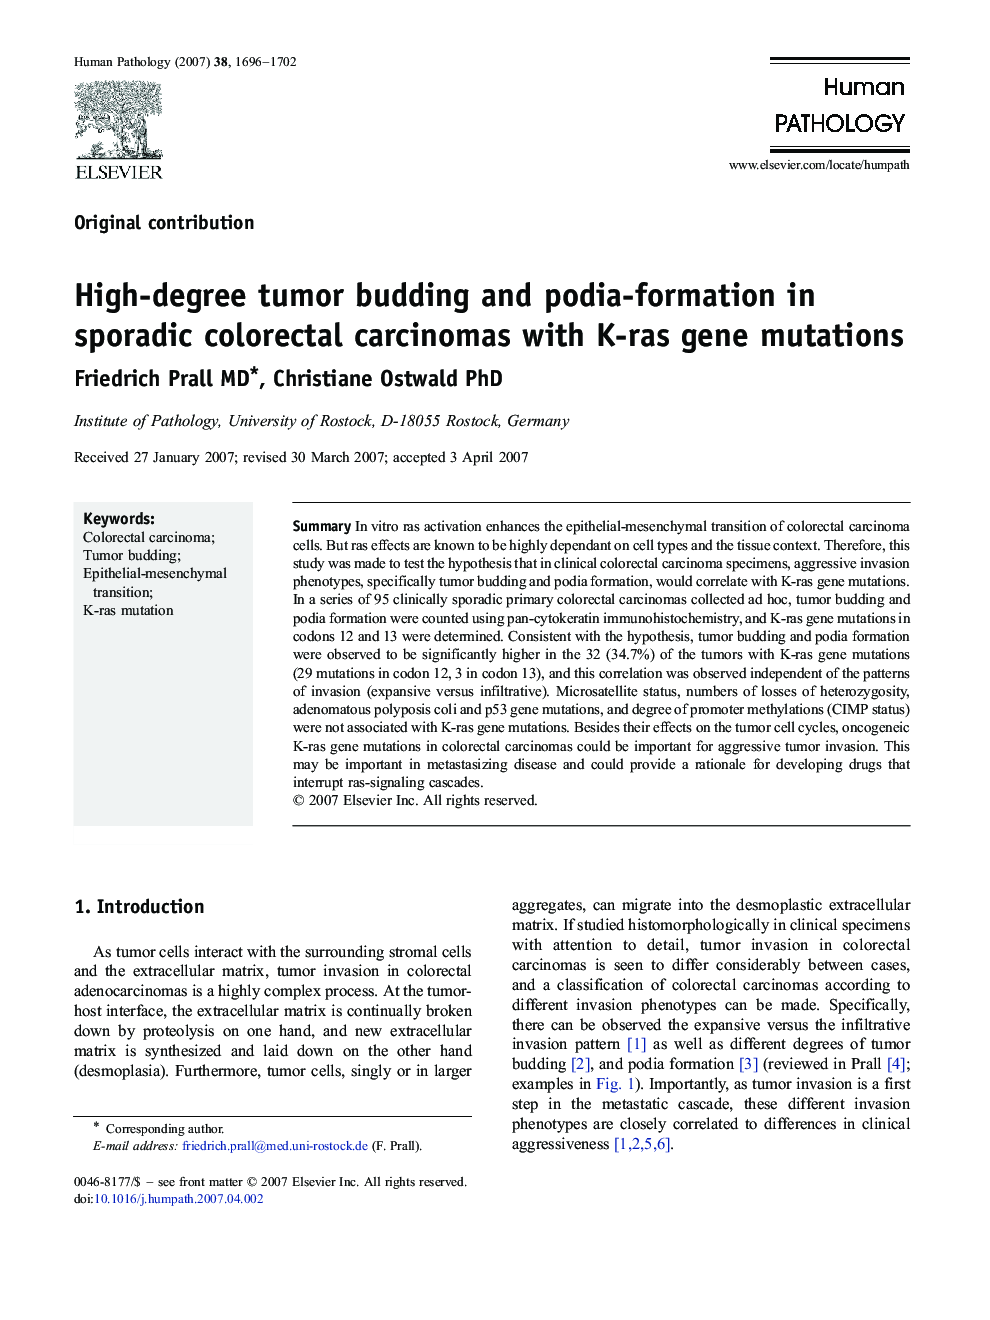 High-degree tumor budding and podia-formation in sporadic colorectal carcinomas with K-ras gene mutations